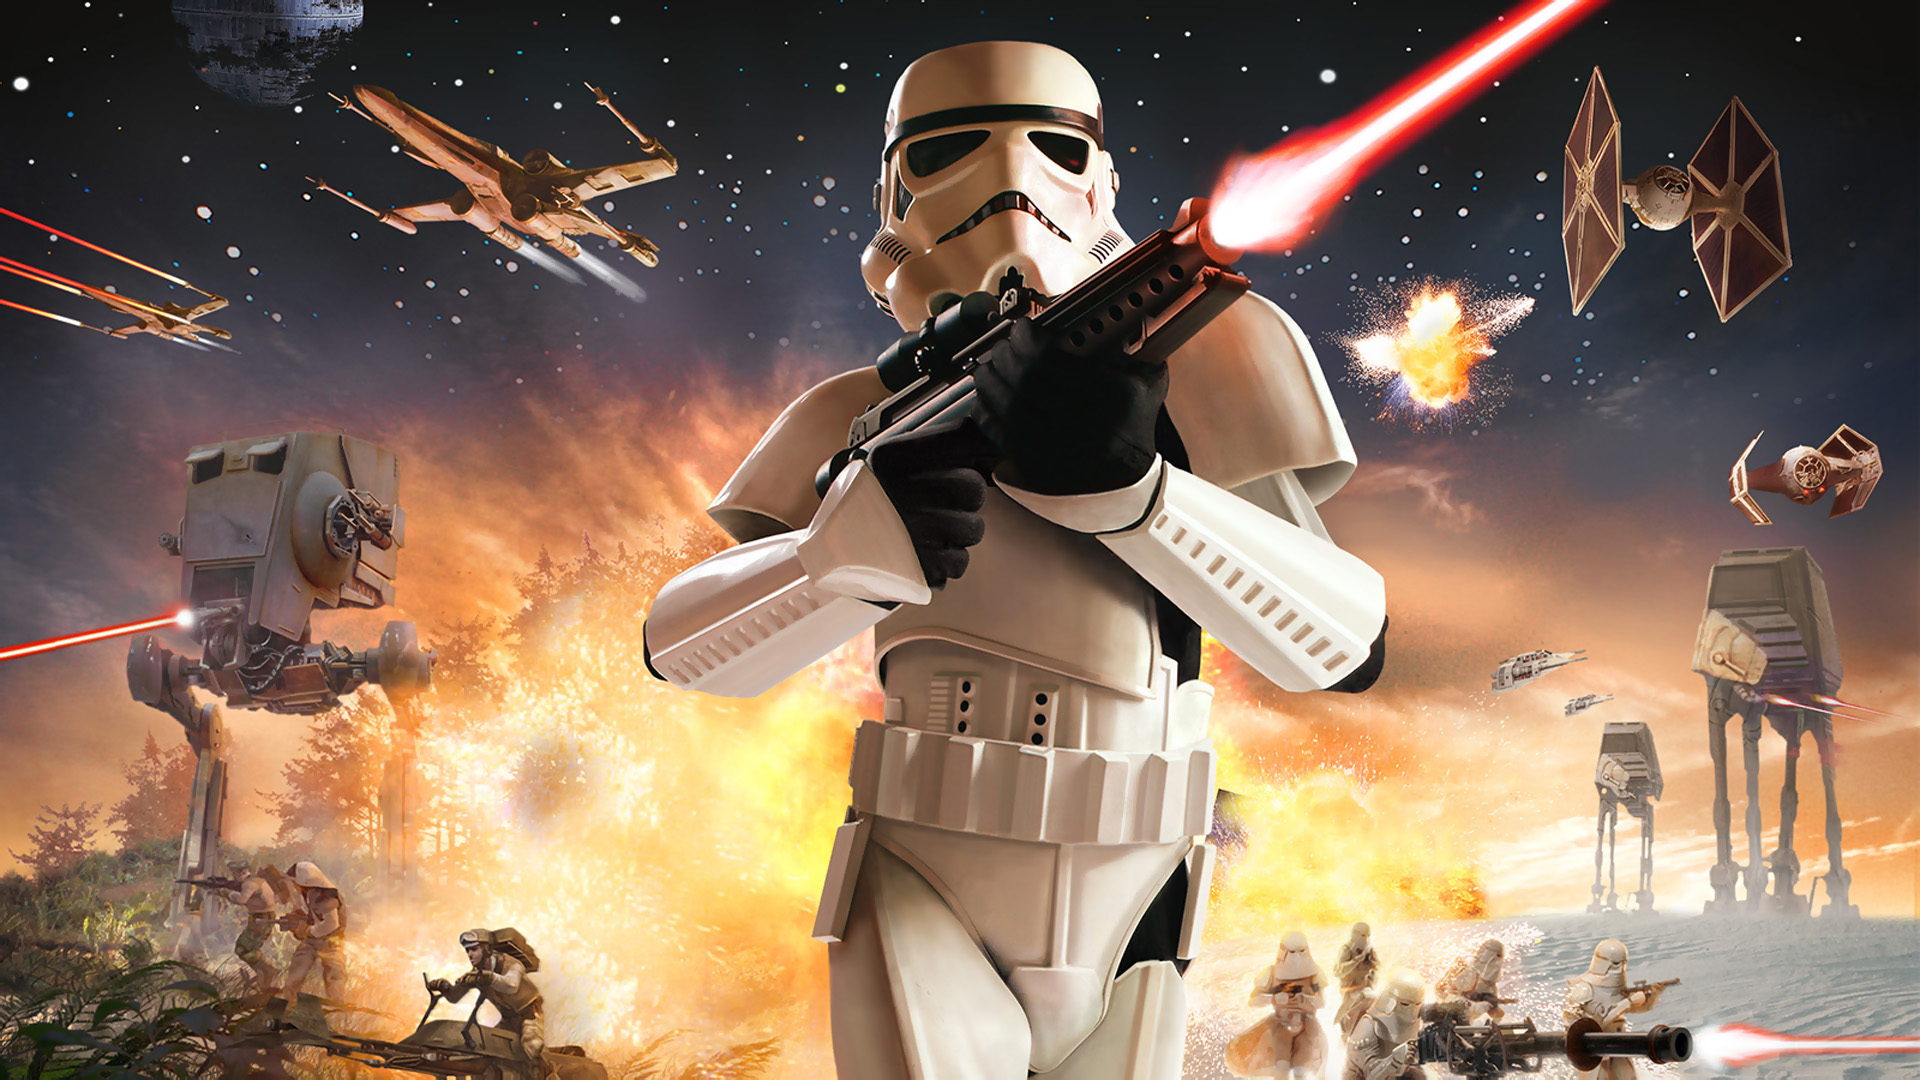 Star Wars: Battlefront HD Wallpapers and Backgrounds